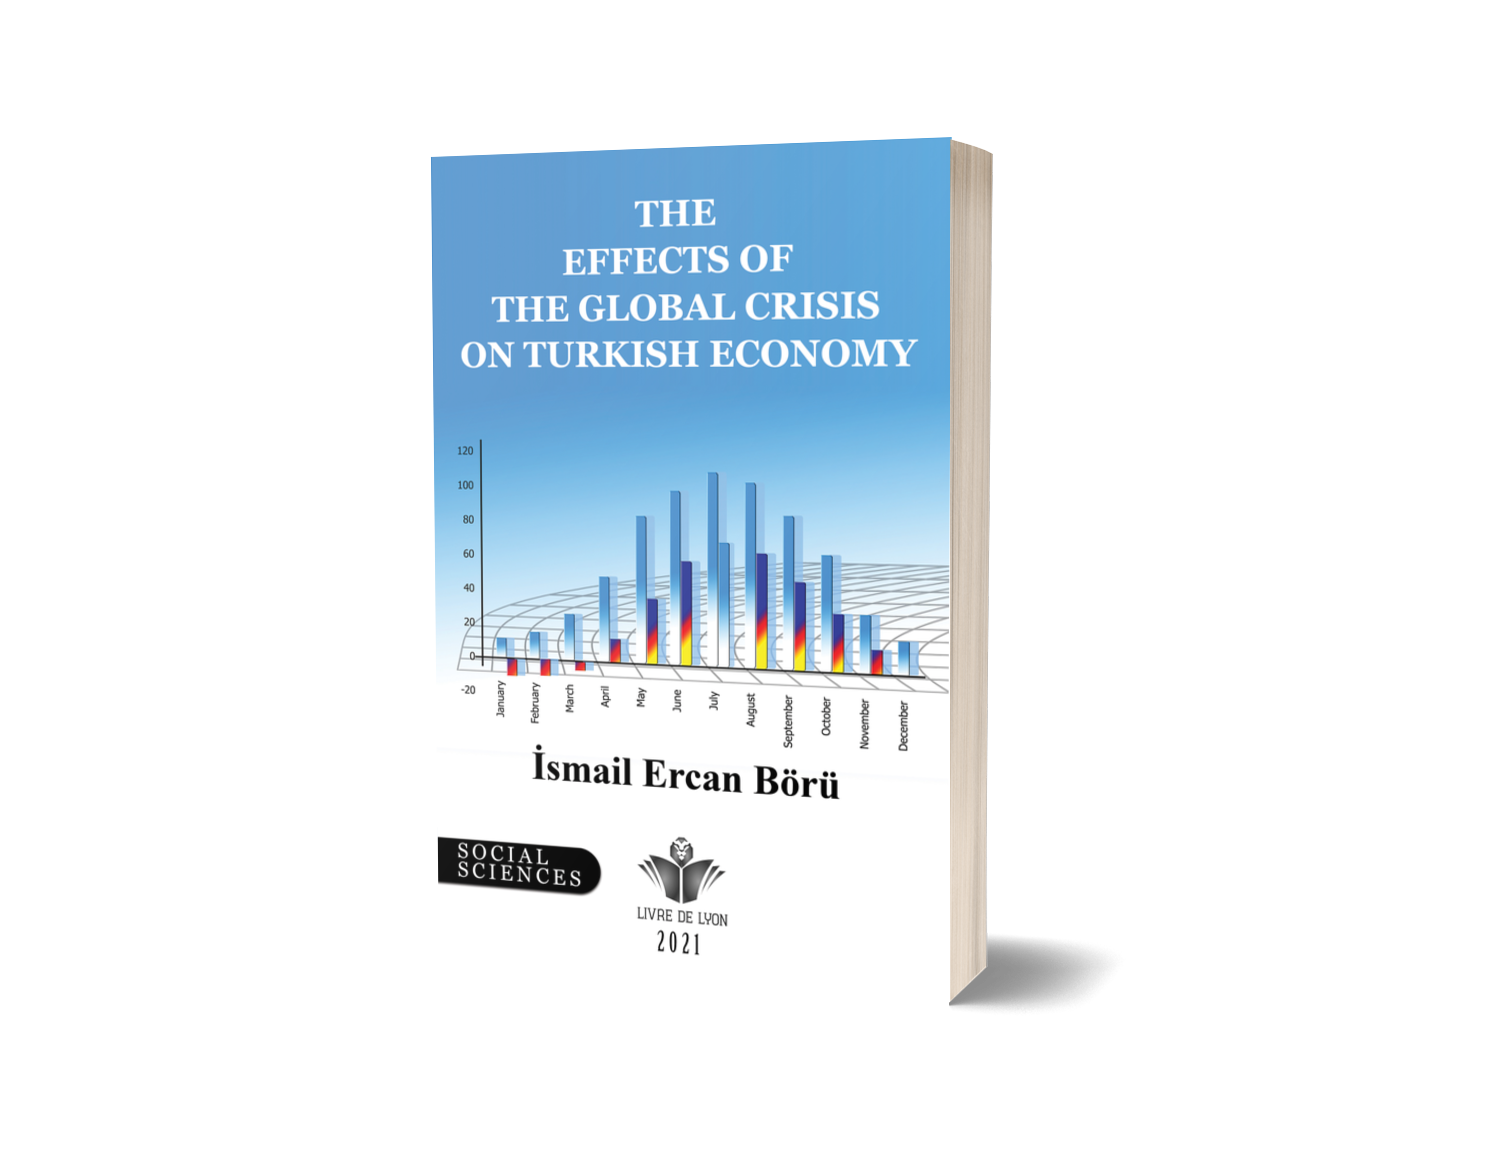 The Effects of The Global Crisis on Turkish Economy